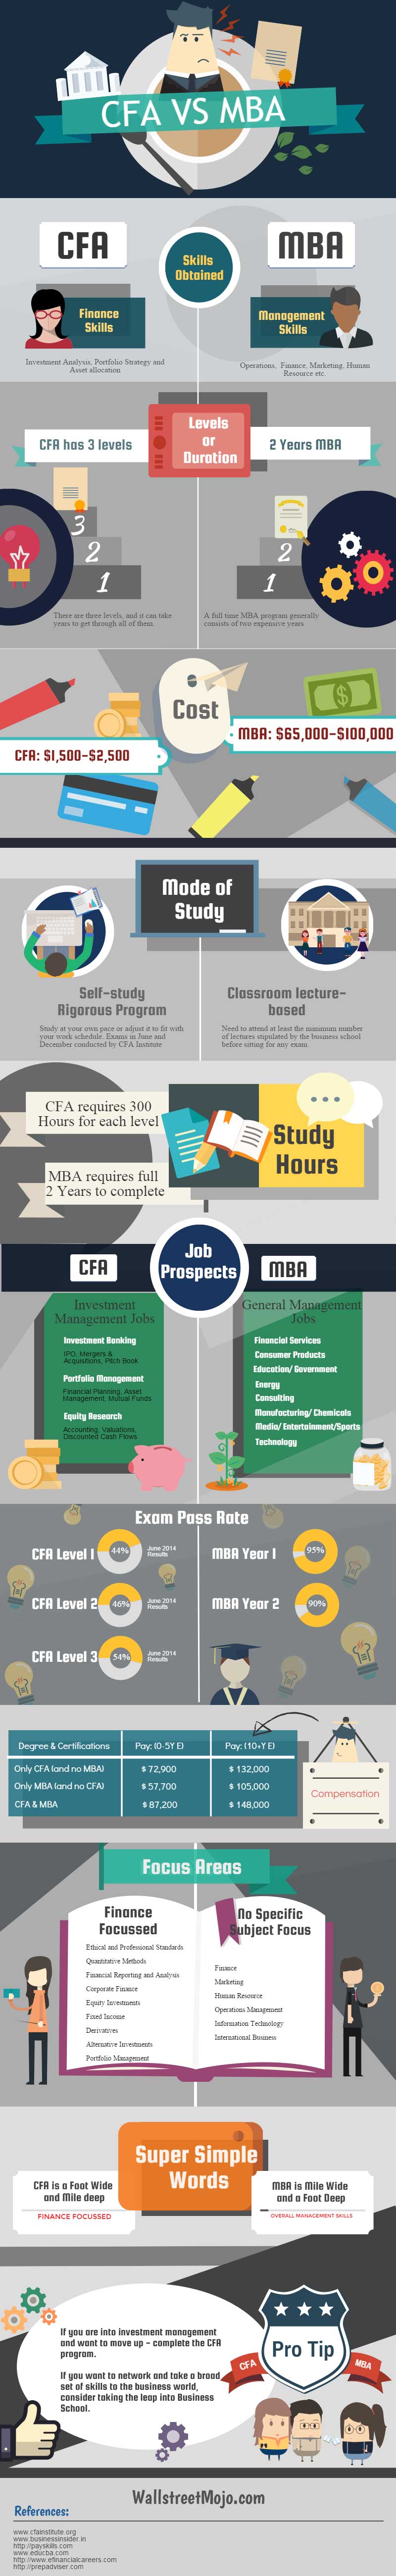 CFA vs MBA - Which is Best for Career